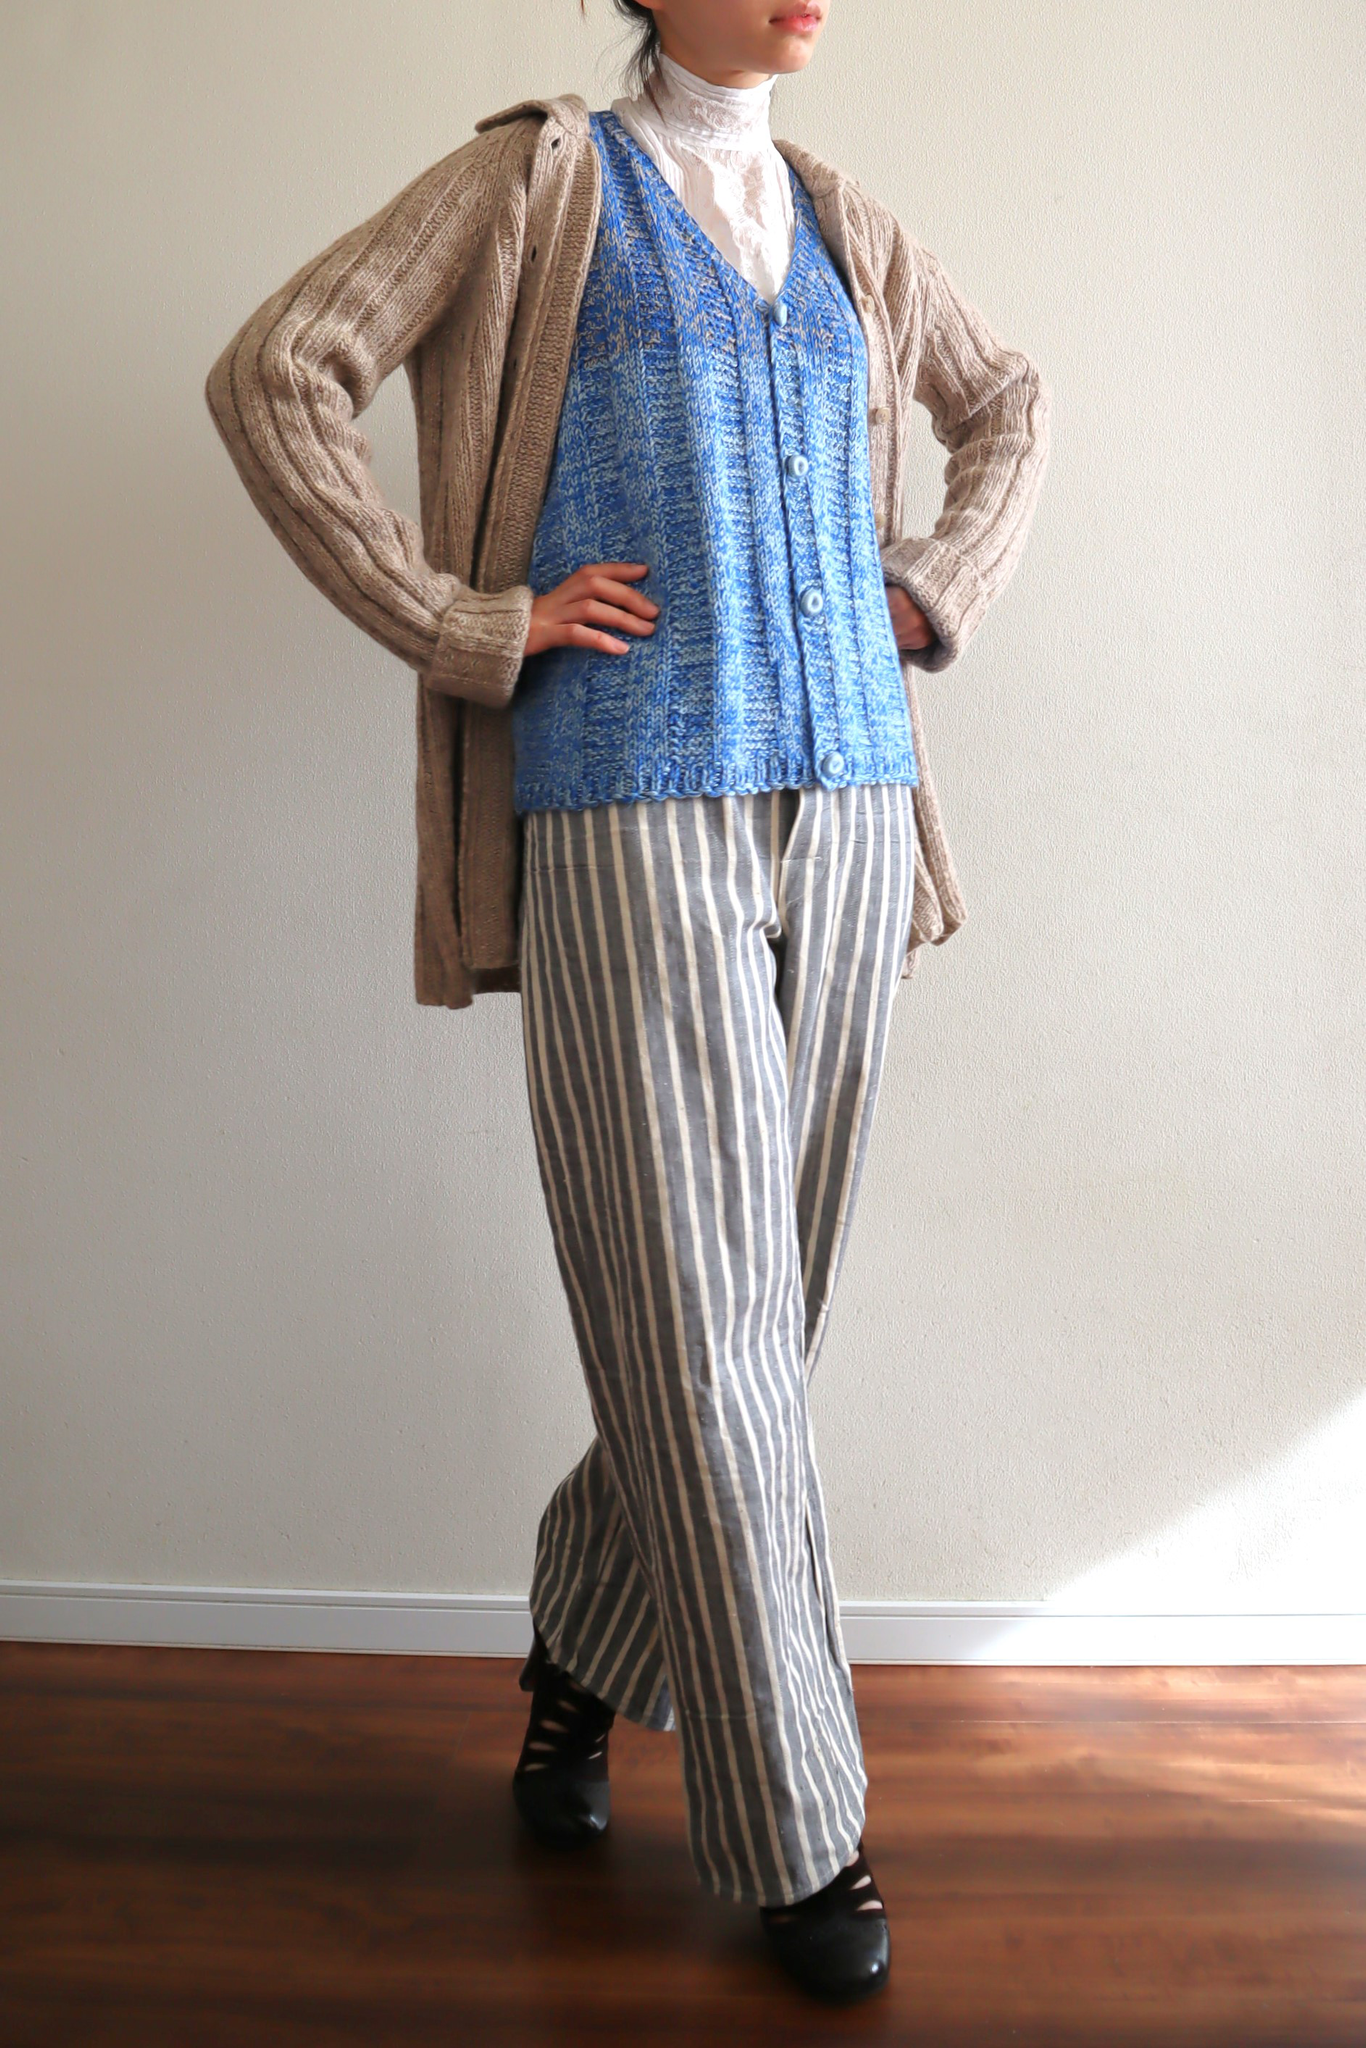 80s French Hand Knit Peasant Wool Cardigan